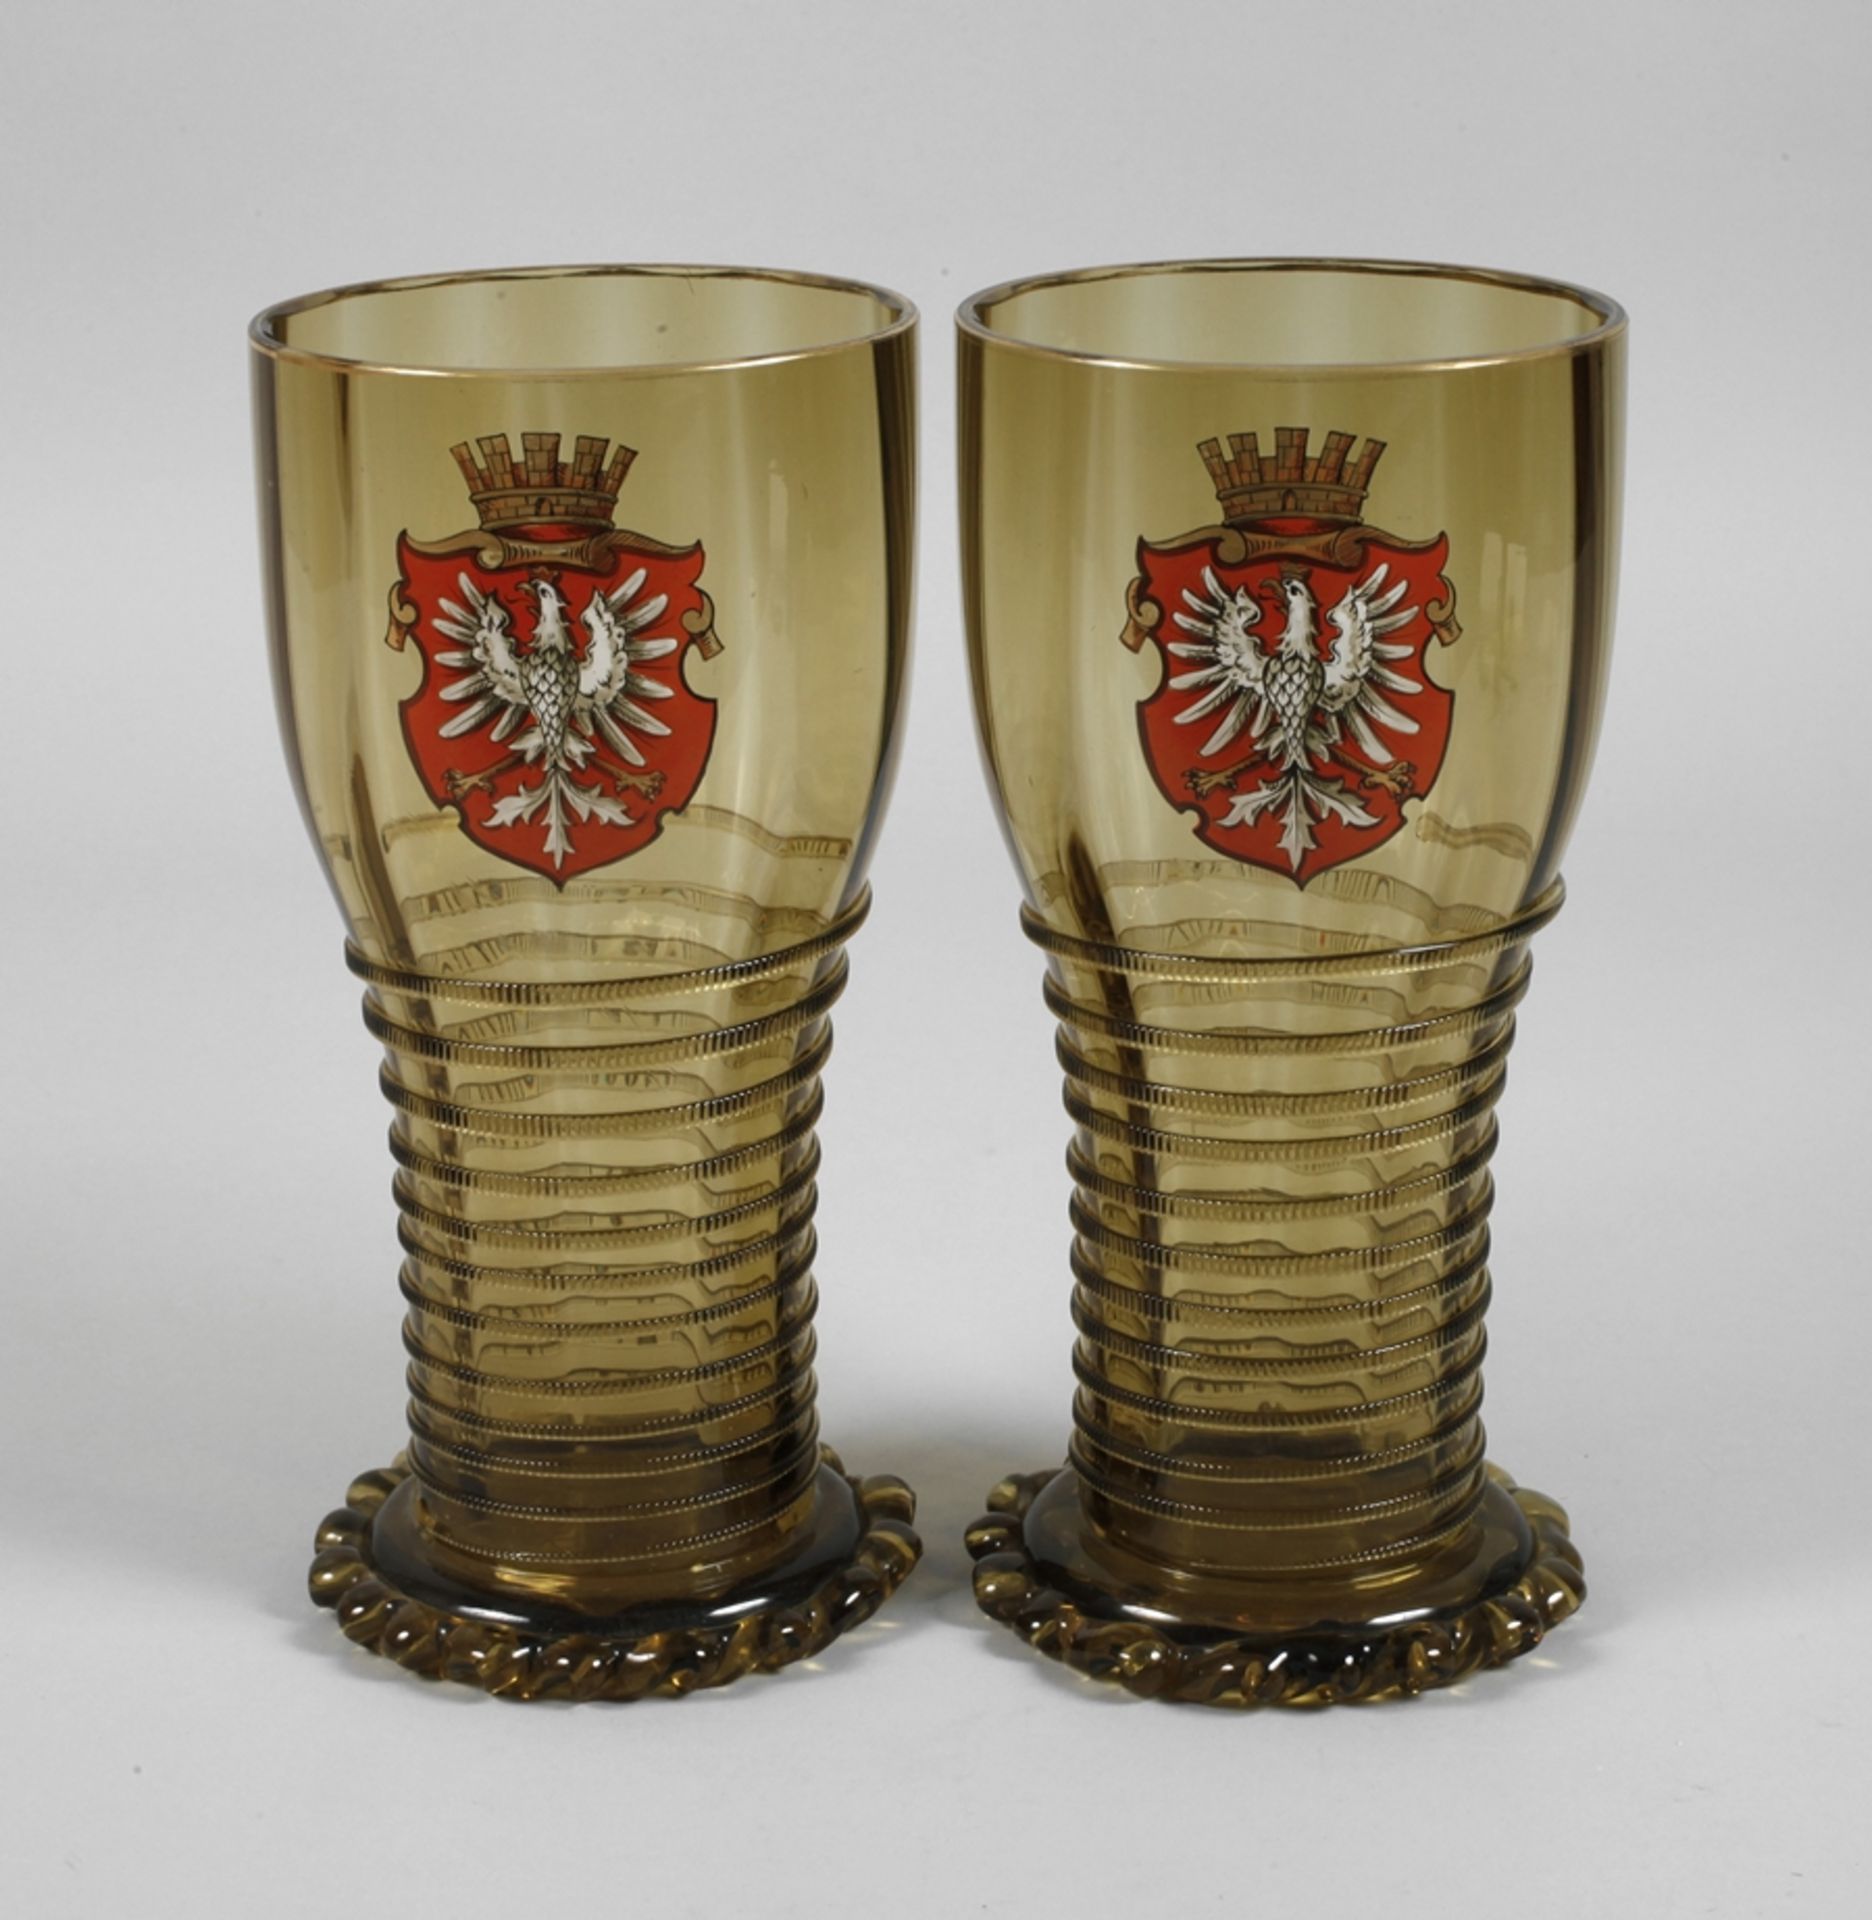 Pair of oversized coat of arms goblets